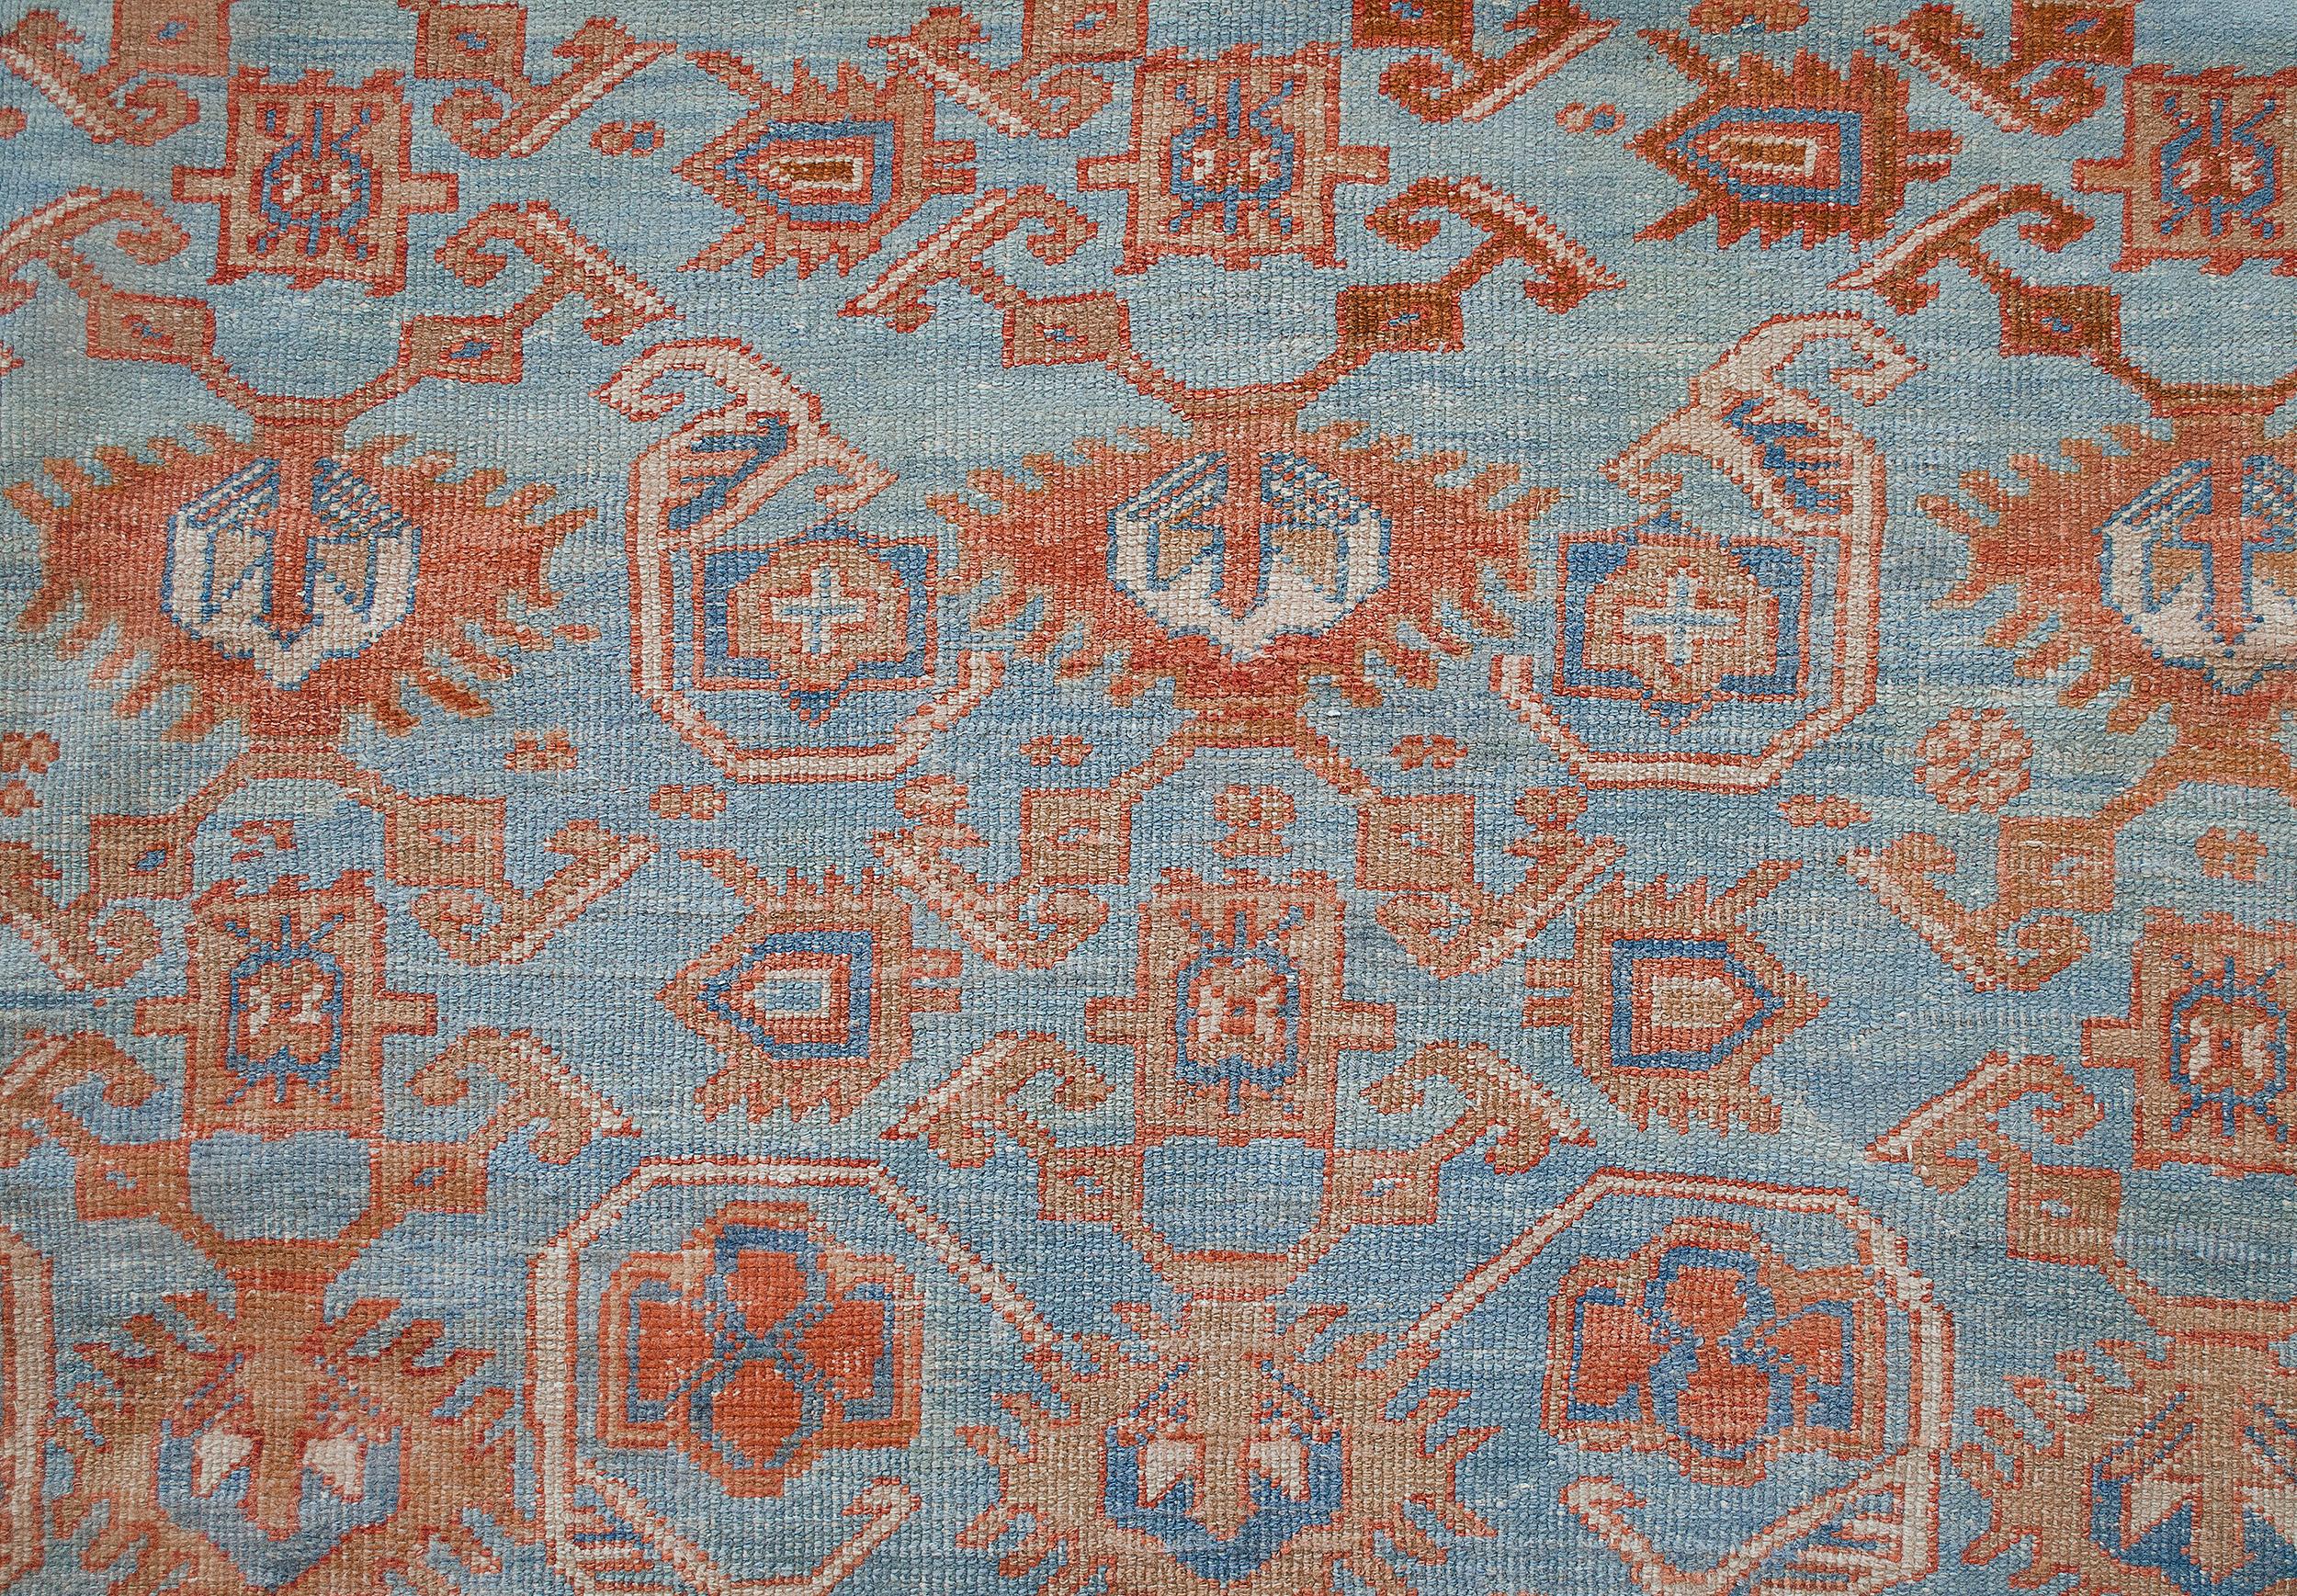 Bakshaish Late 19th Century Hand-Woven Bakhshaish Rug from North West Persia For Sale